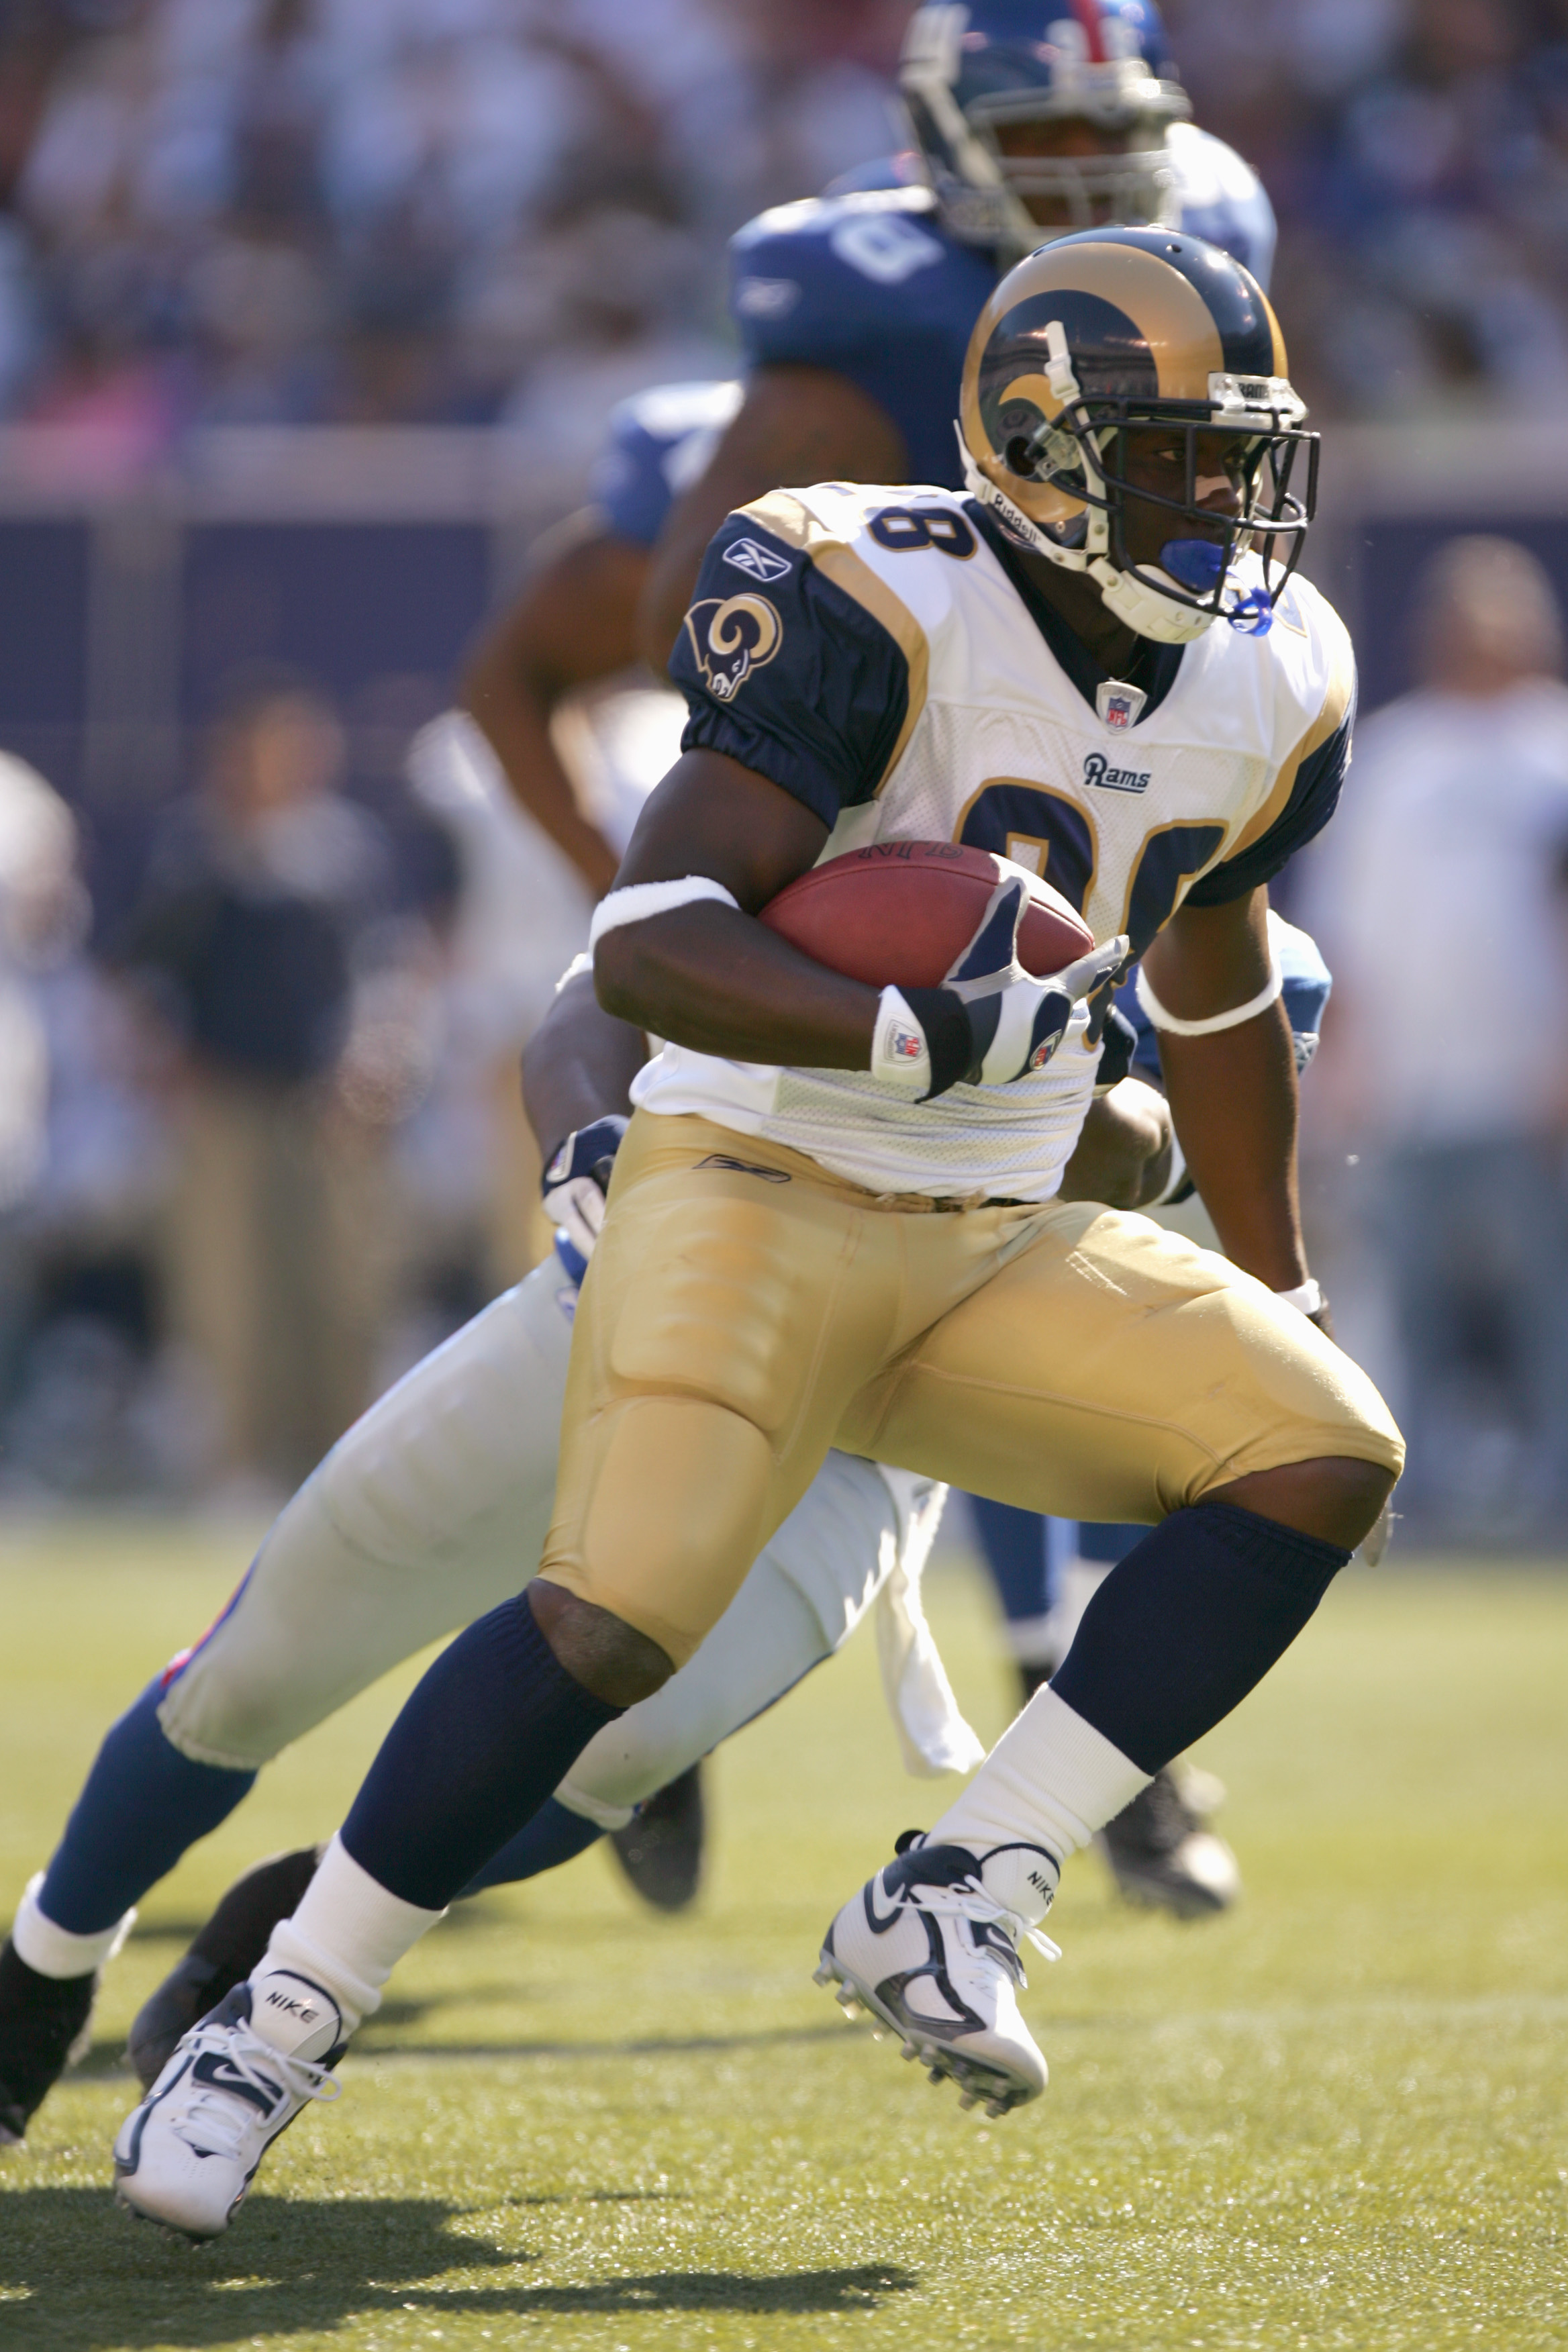 EAST RUTHERFORD, NJ - OCTOBER 02: Marshall Faulk #28 of the St. Louis Rams carries the ball during the game against the New York Giants on October 2, 2005 at Giants Stadium in East Rutherford, New Jersey. The Giants won 44-24. (Photo by Ezra Shaw/Getty Im